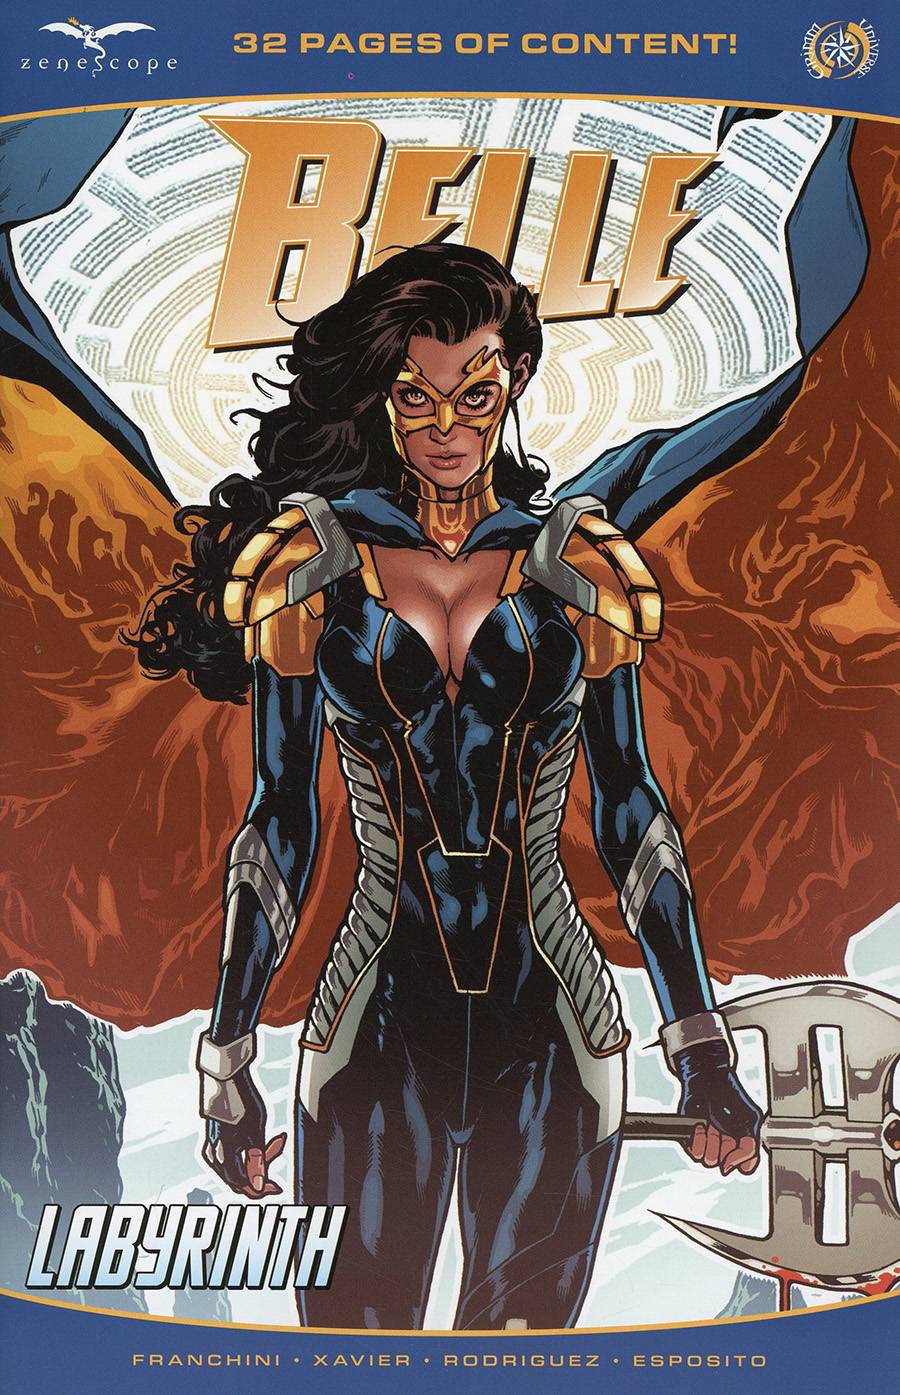 Grimm Fairy Tales Presents Belle Labyrinth #1 (One Shot) Cover A Jeff Spokes